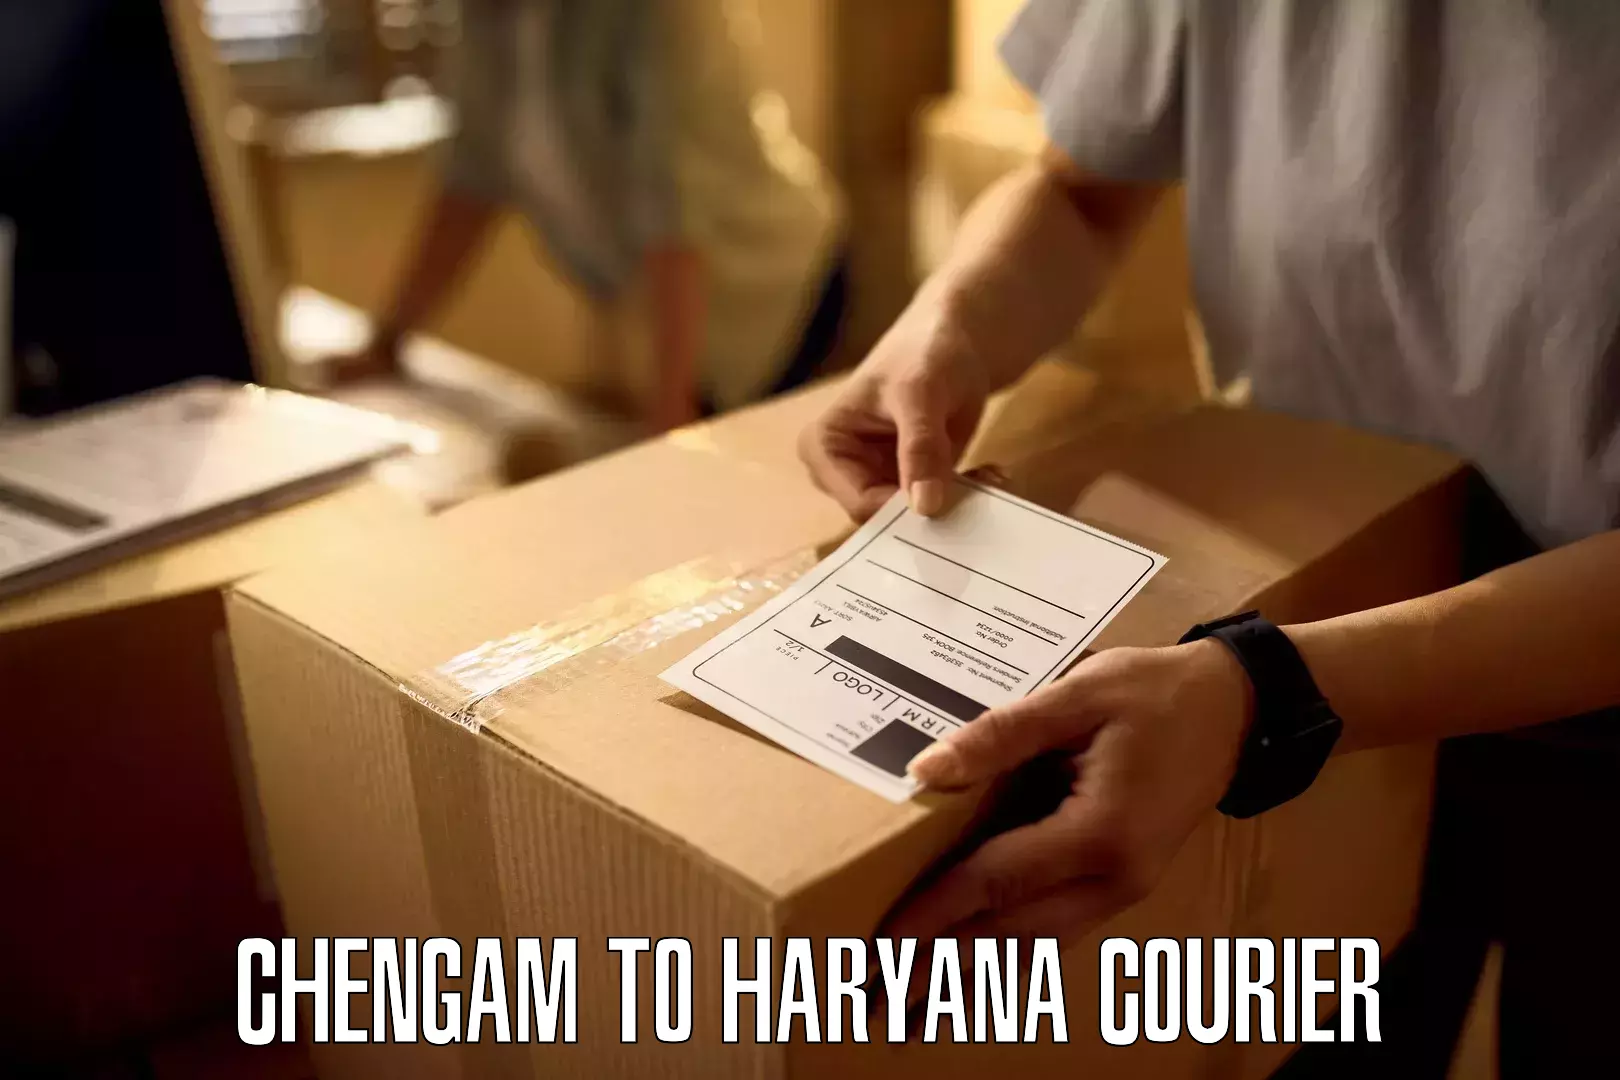 Urban courier service Chengam to NCR Haryana